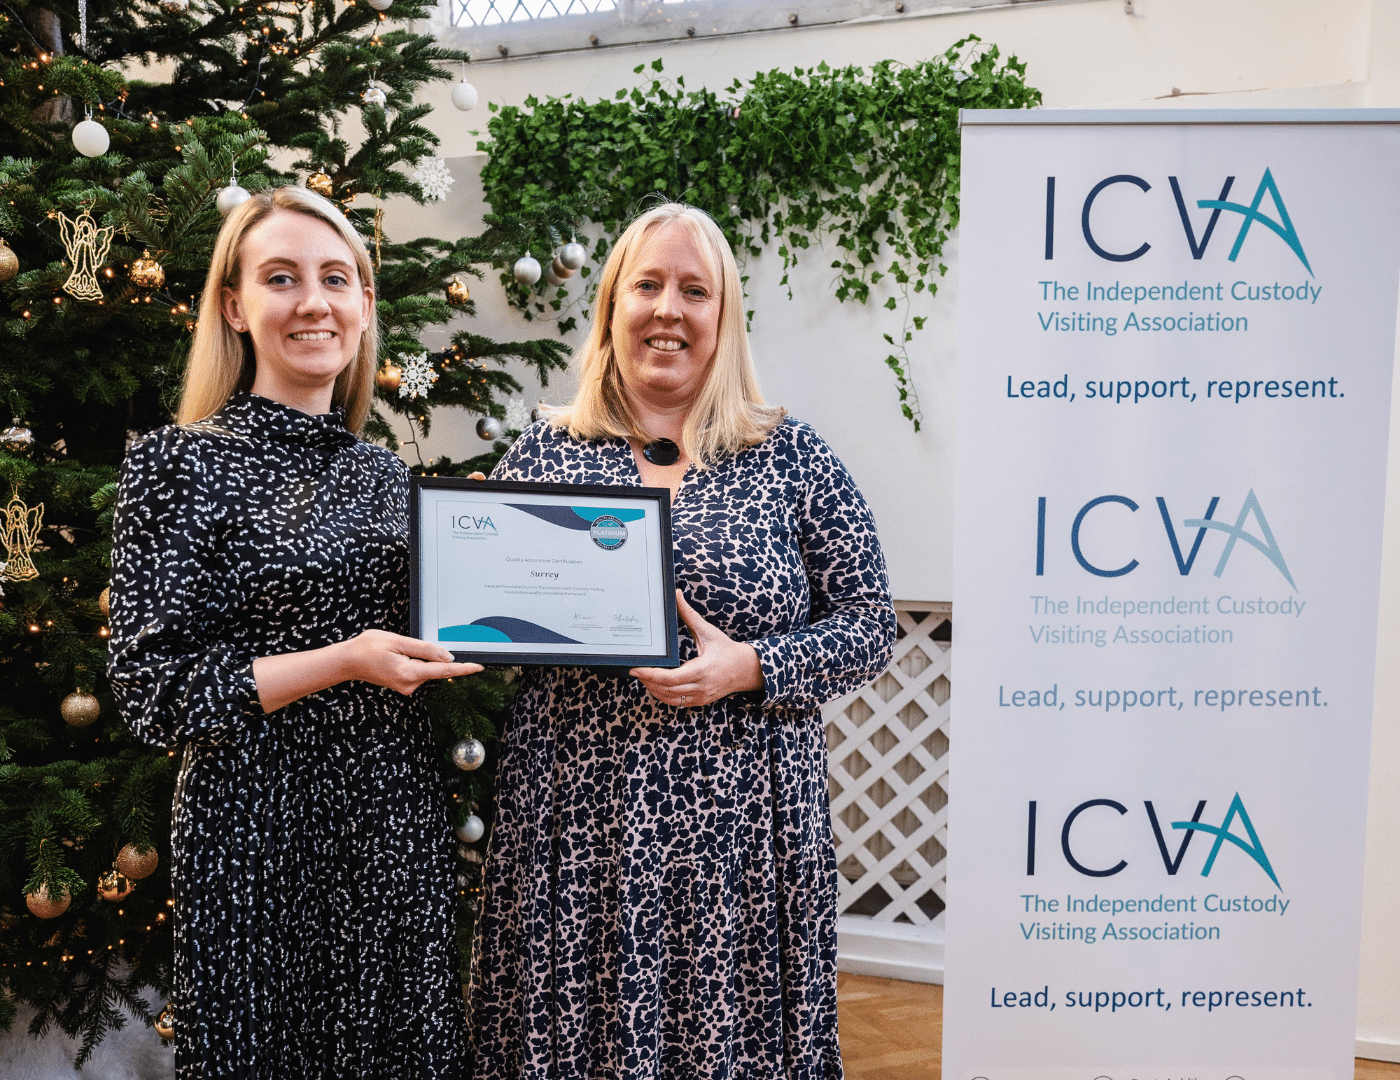 Deputy-Police-and-Commissioner-Ellie-Vesey-Thompson-and-ICV-Scheme-Manager-Erika-Dallinger-at-the-ICVA-Awards-in-Birmingham